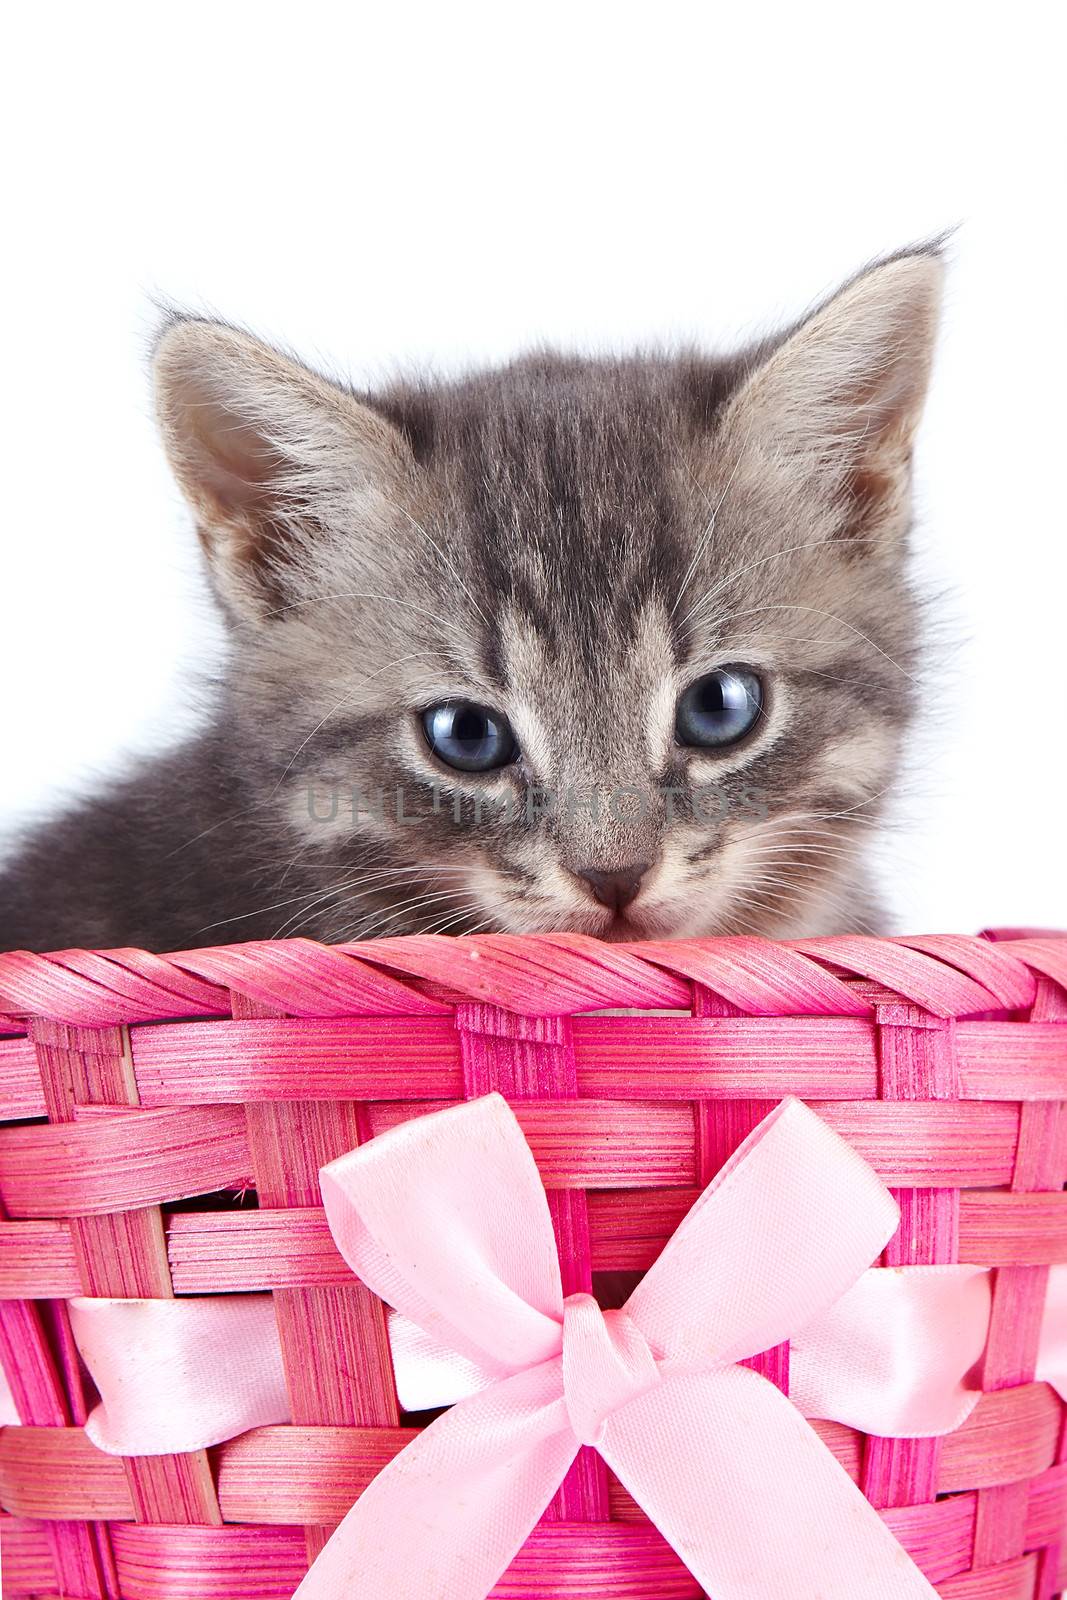 Kitten in a basket with a bow. Gray striped kitten. Striped kitten with blue eyes. Kitten on a white background. Small predator.